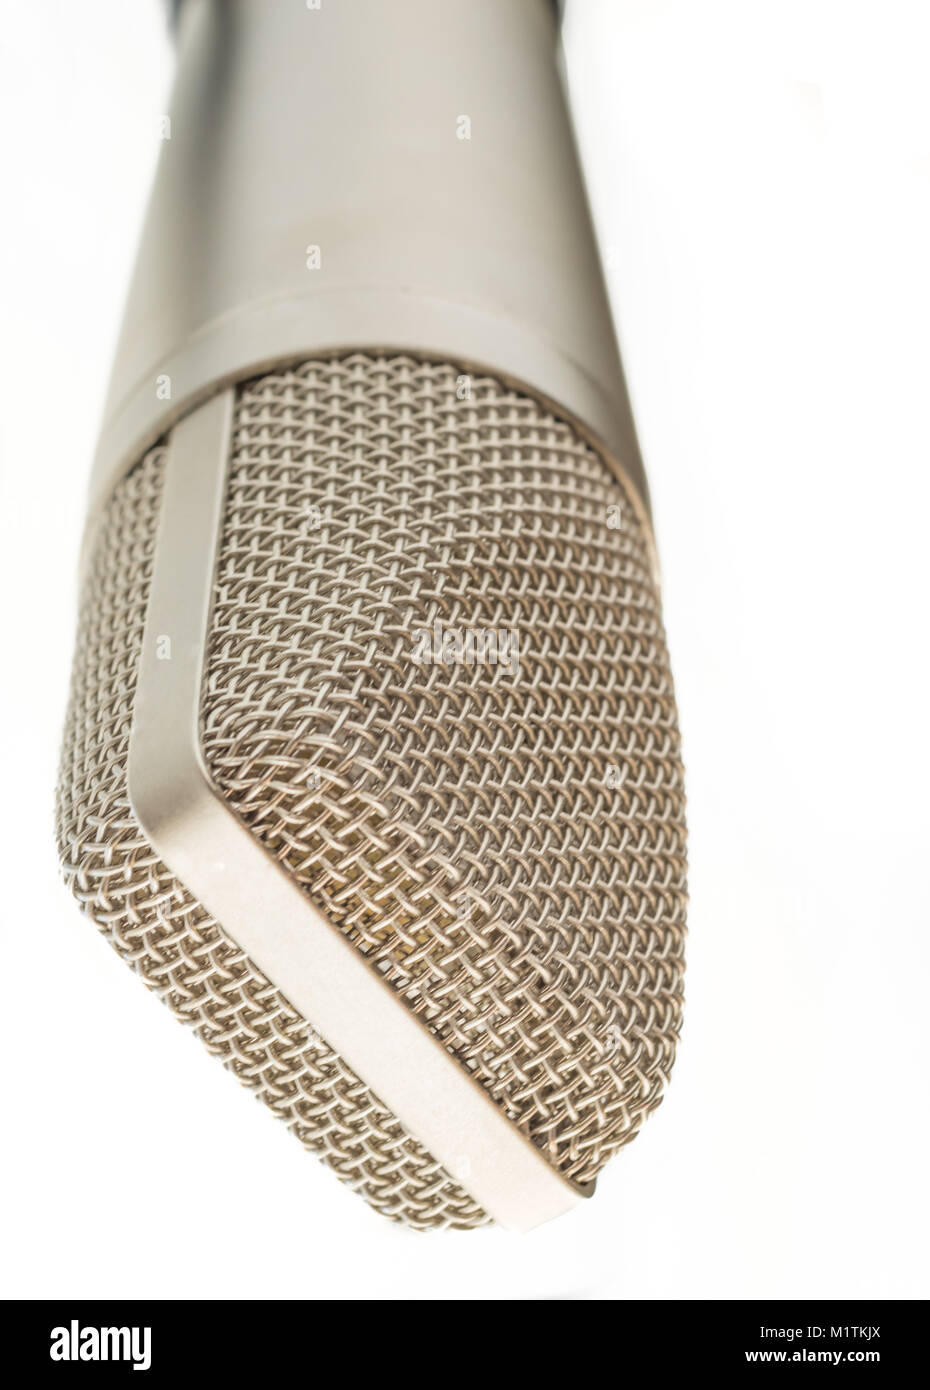 An old fashioned silver microphone is placed on a stand upside down. The background is all white Stock Photo